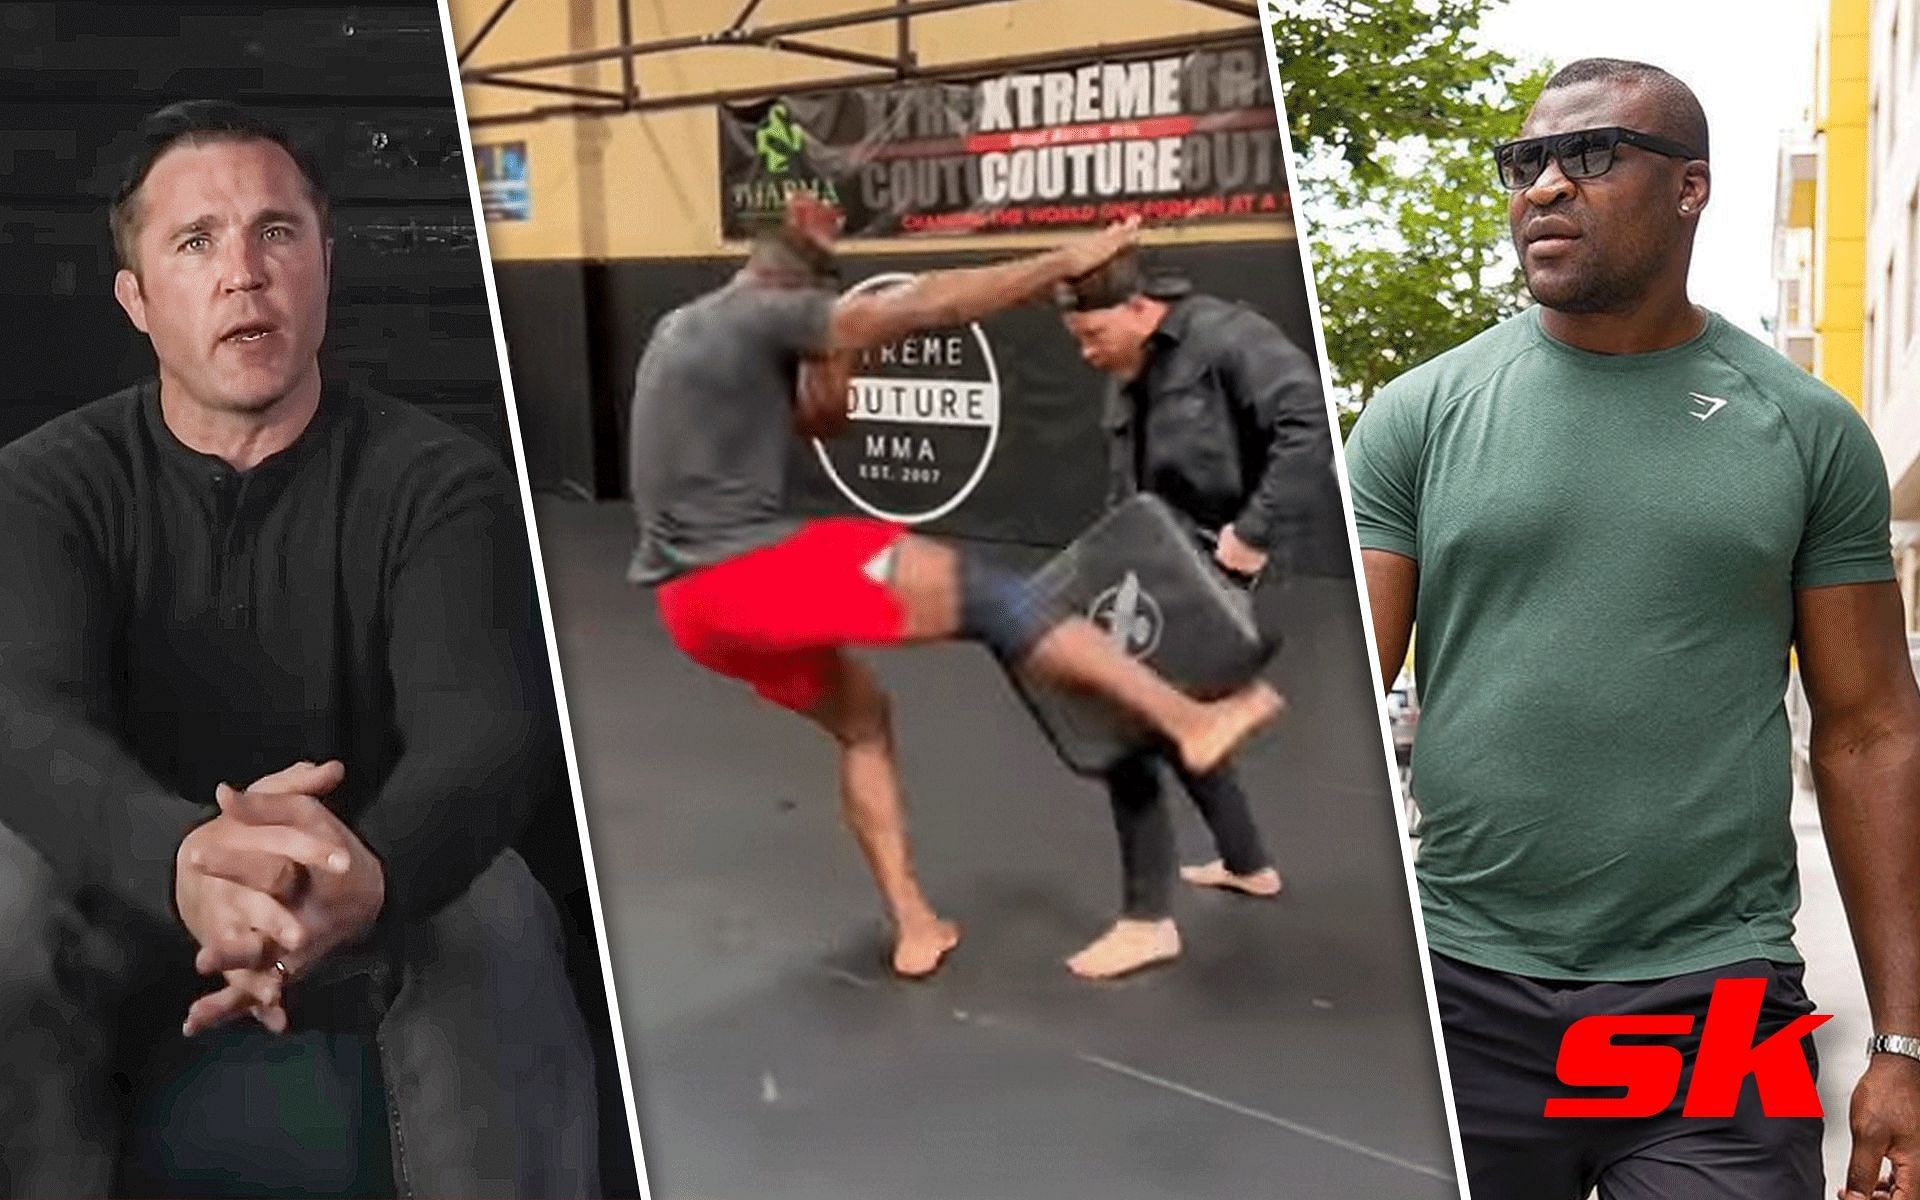 Chael Sonnen (Left), Francis Ngannou with Eric Nicksick (Middle), Francis Ngannou (Right) [Image courtesy: @Chael Sonnen on YouTube, @francisngannou on Instagram]